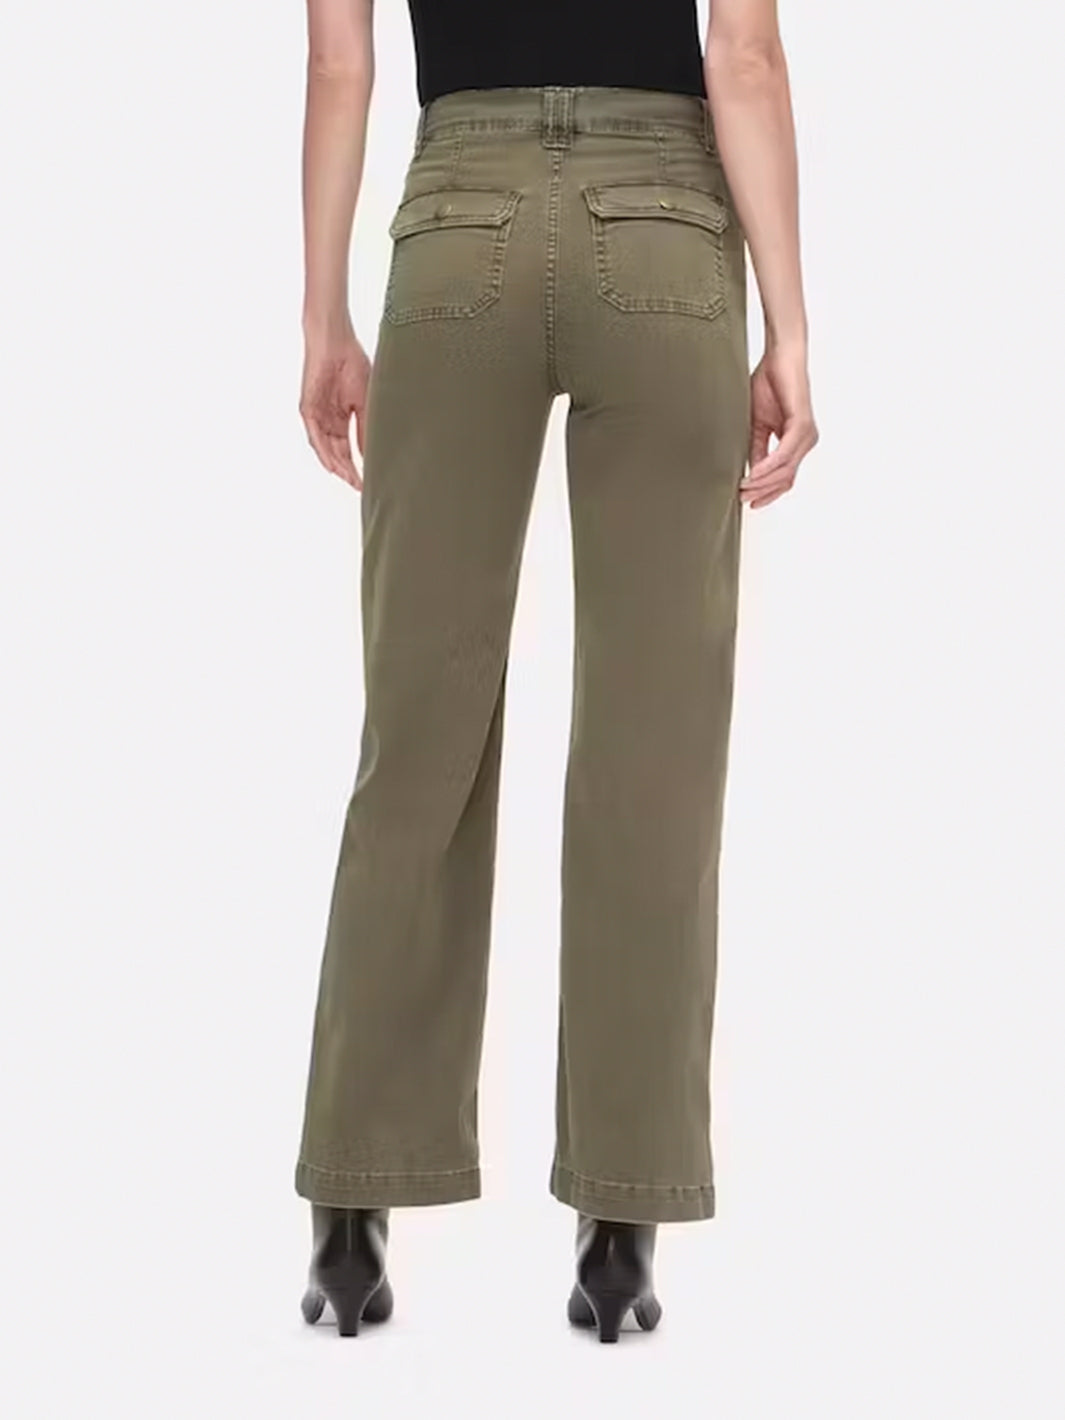 Utility Pant in Washed Winter Moss